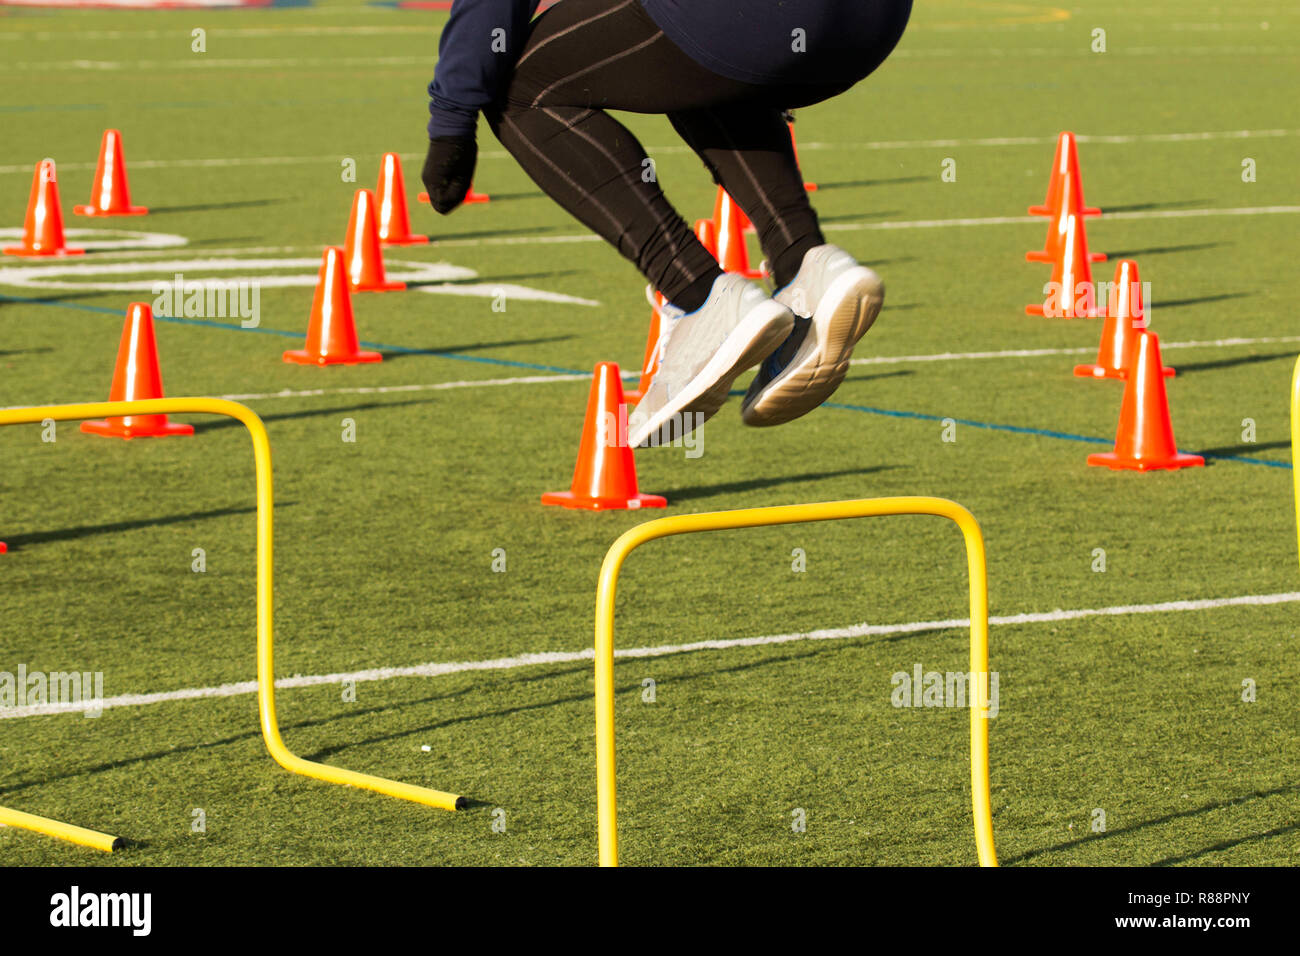 An athlete works out jumping over yellow hurdles on a green turf field with orange cones on it Stock Photo